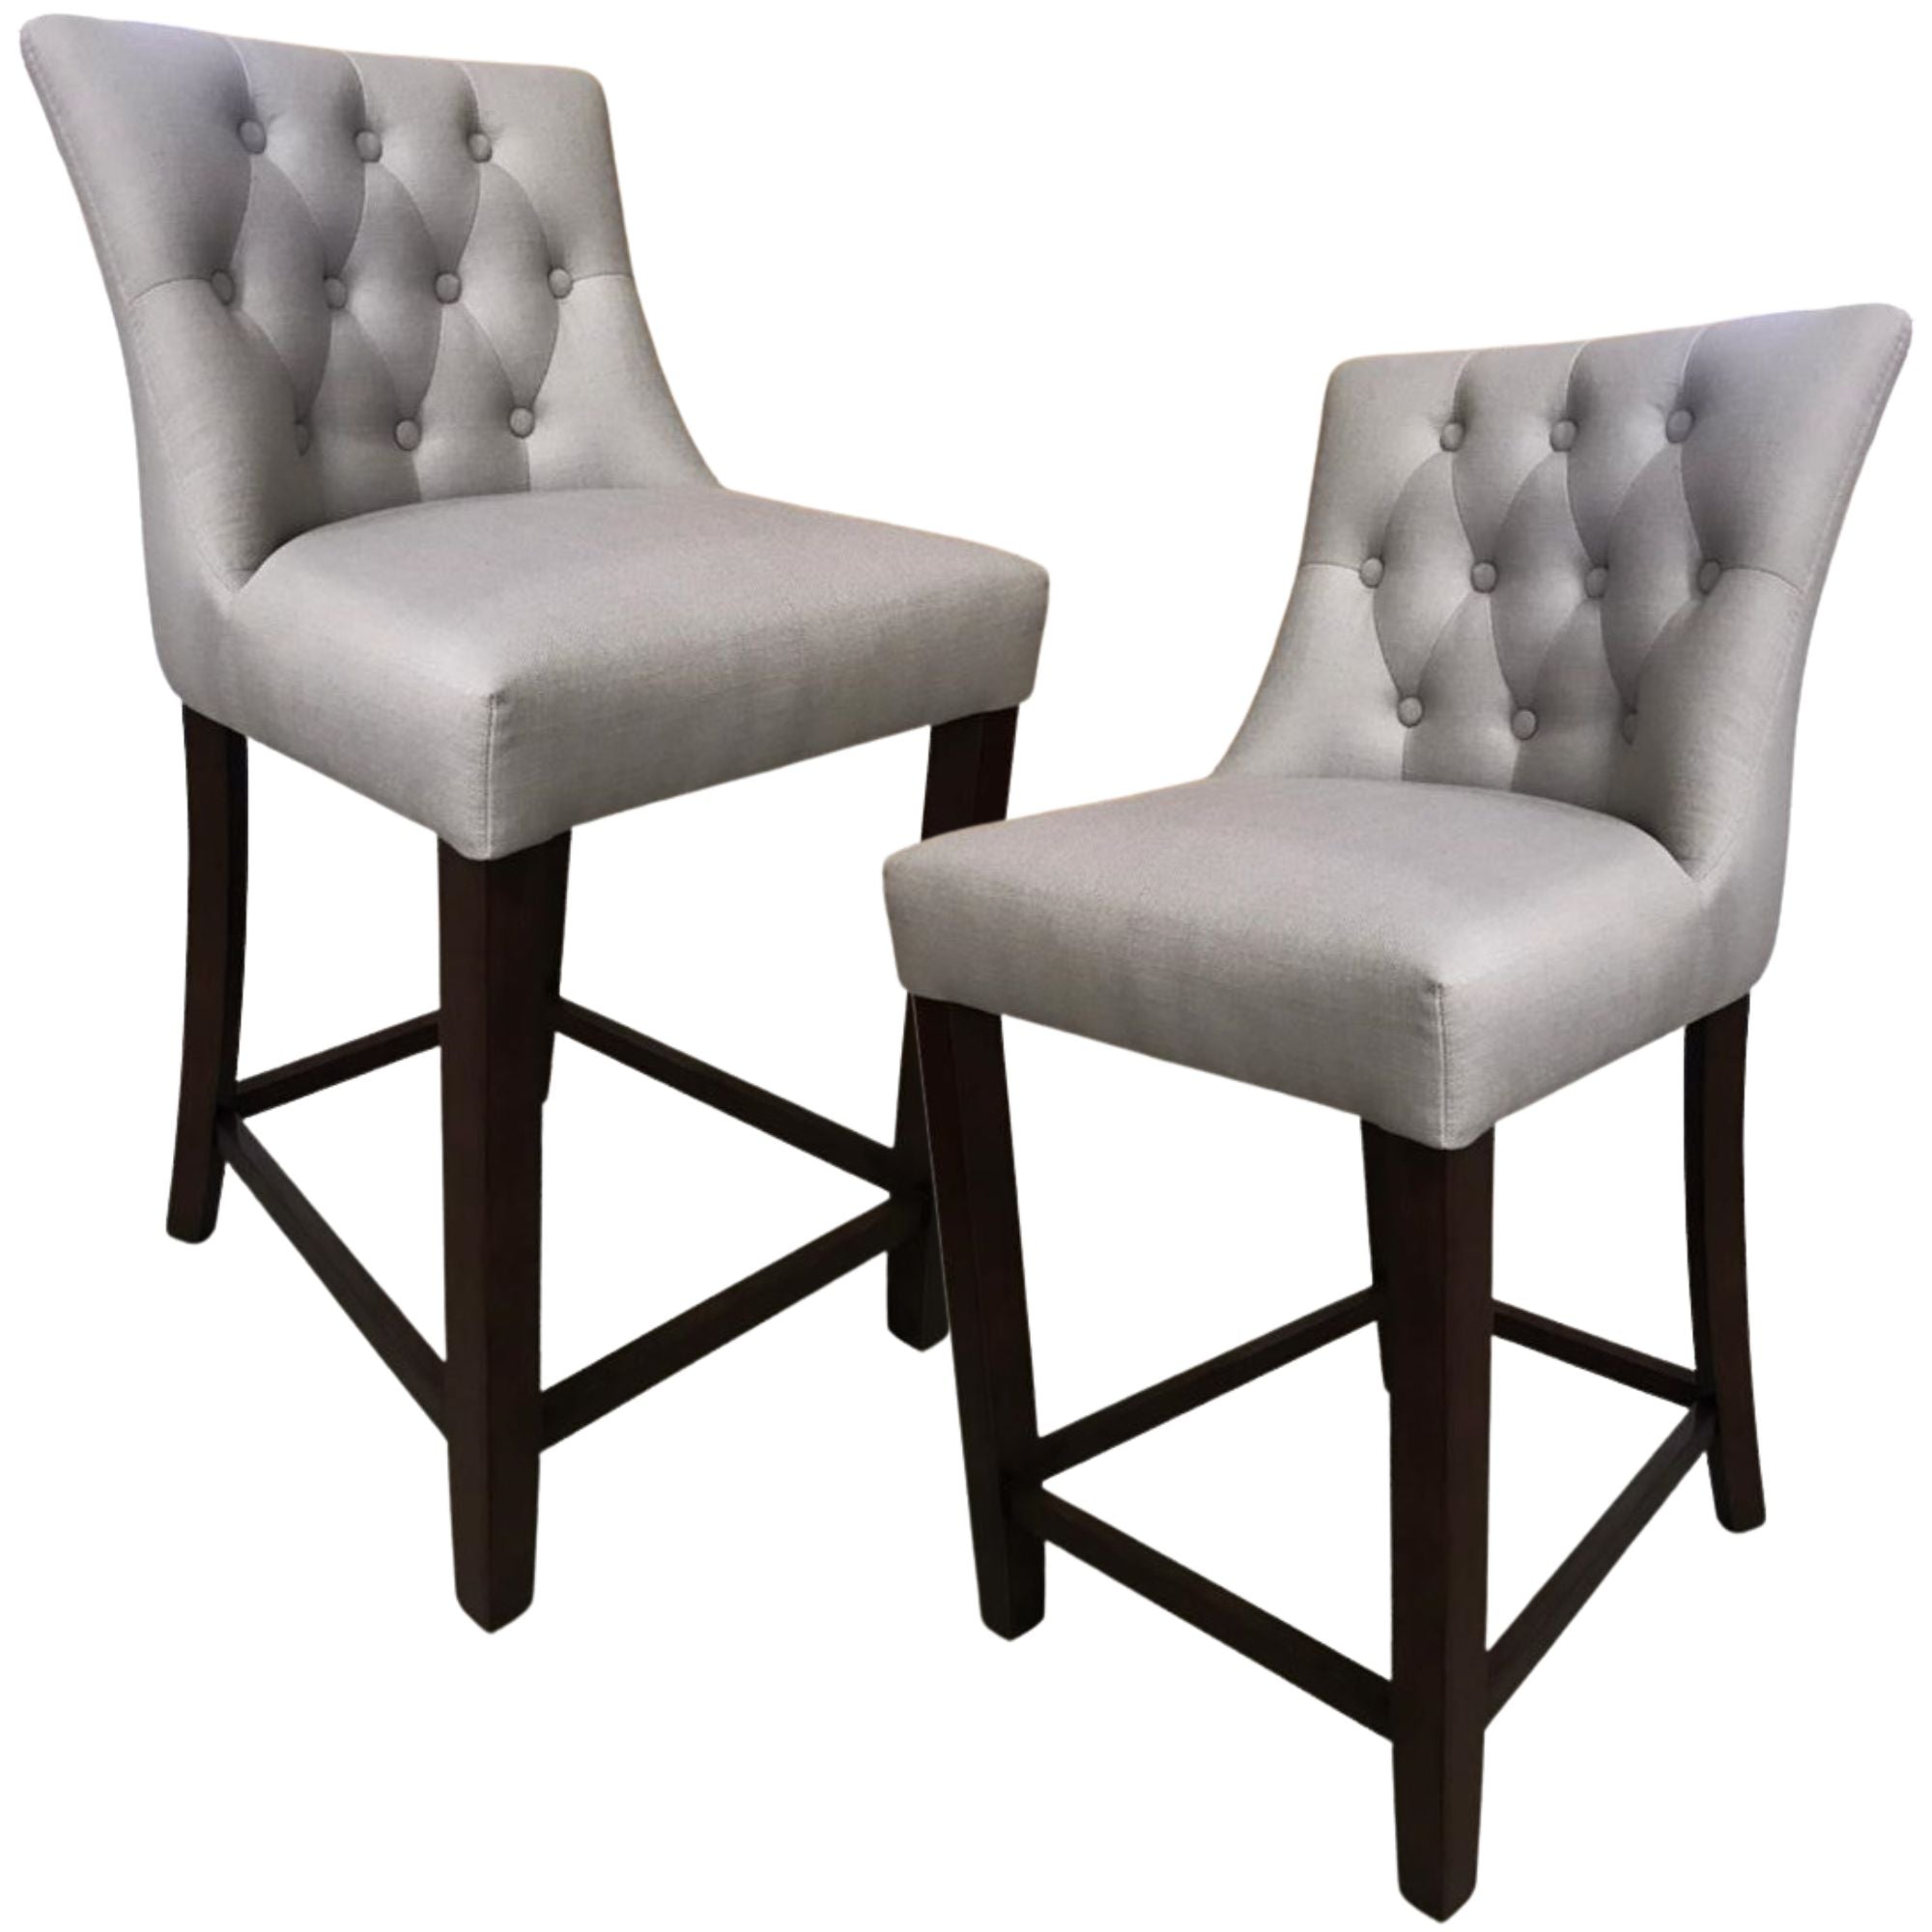 florence-2pc-high-fabric-dining-chair-bar-stool-french-provincial-solid-timber